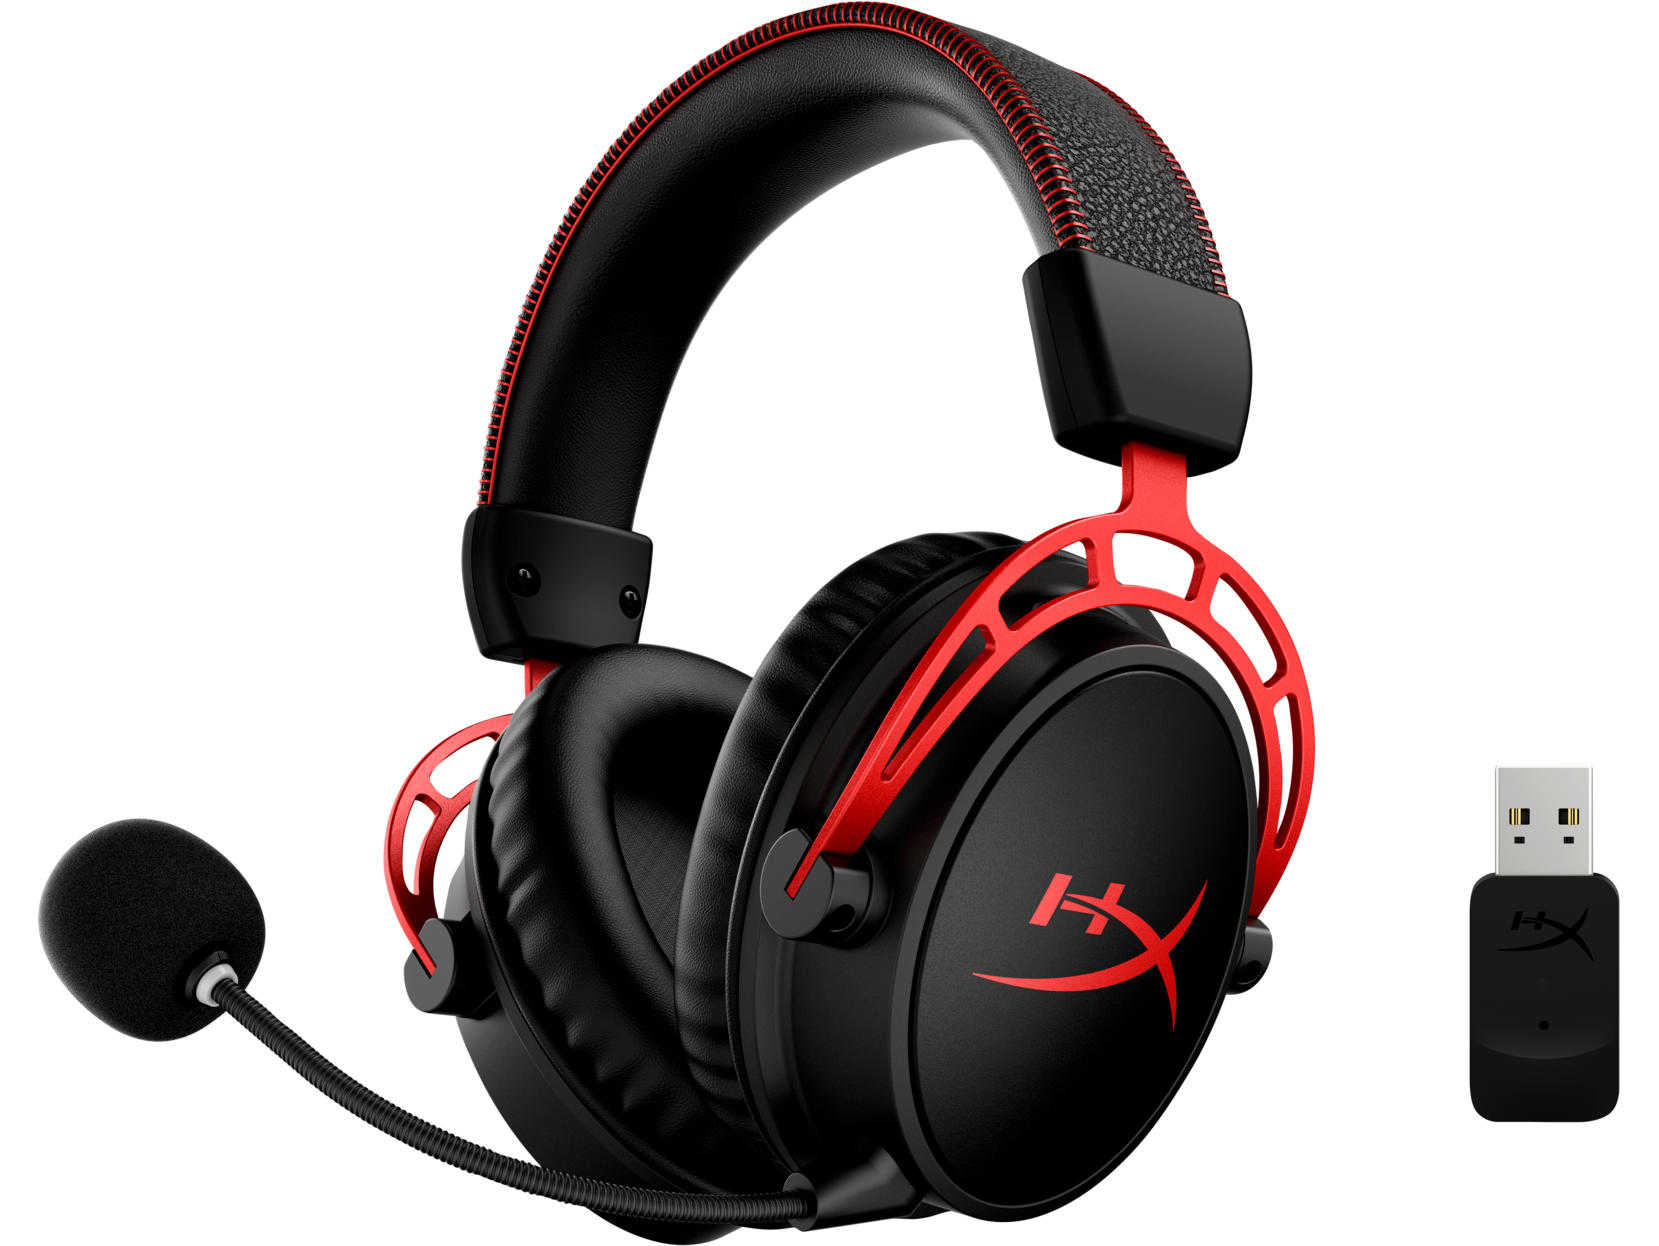 HyperX Cloud Alpha Wireless Over-Ear Gaming Headset, Red - image 3 of 7